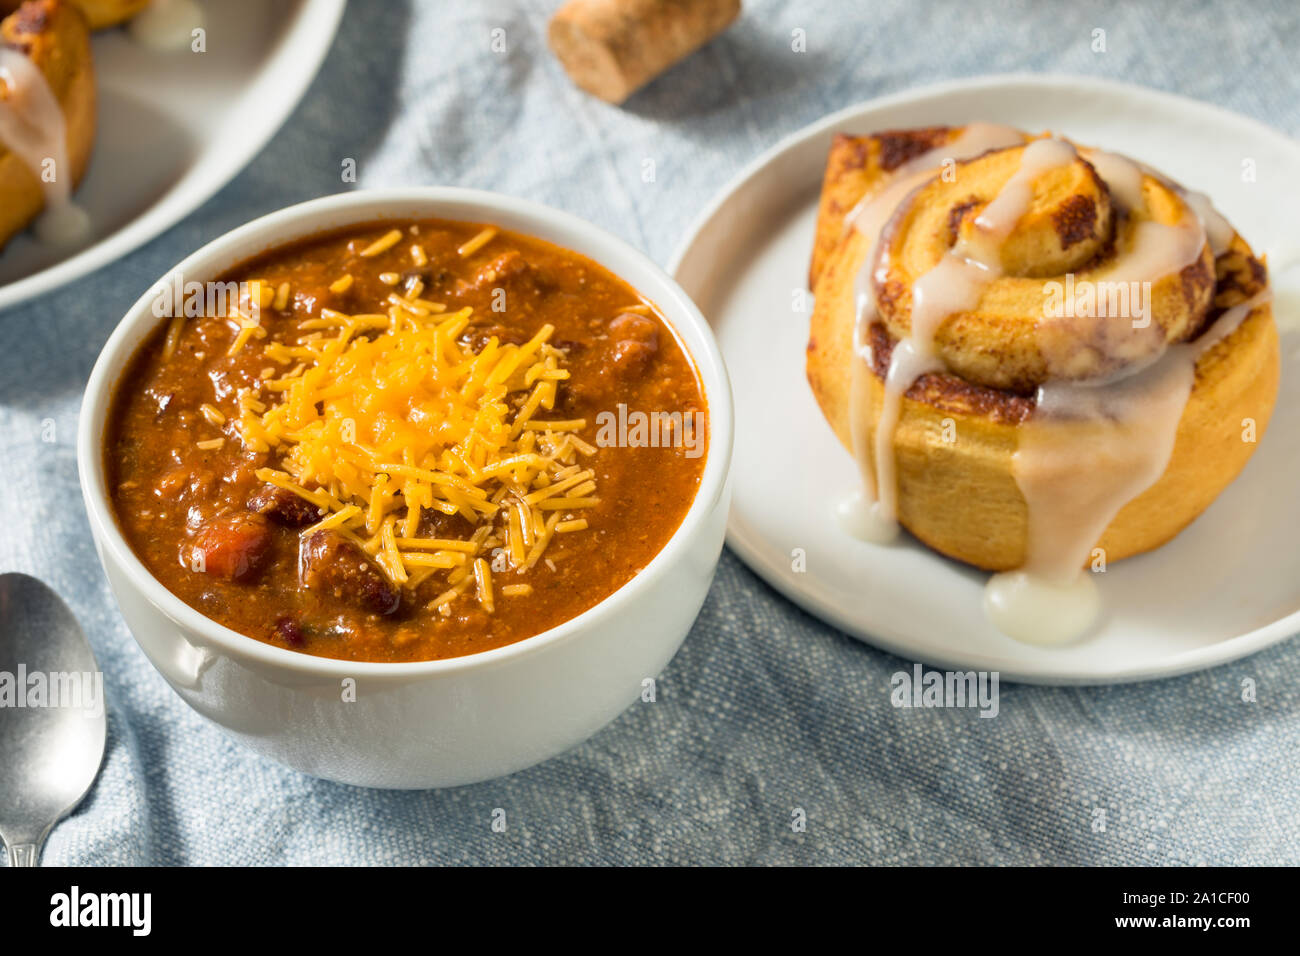 Homemade Chili Soup and Cinnamon Roll for Lunch Stock Photo